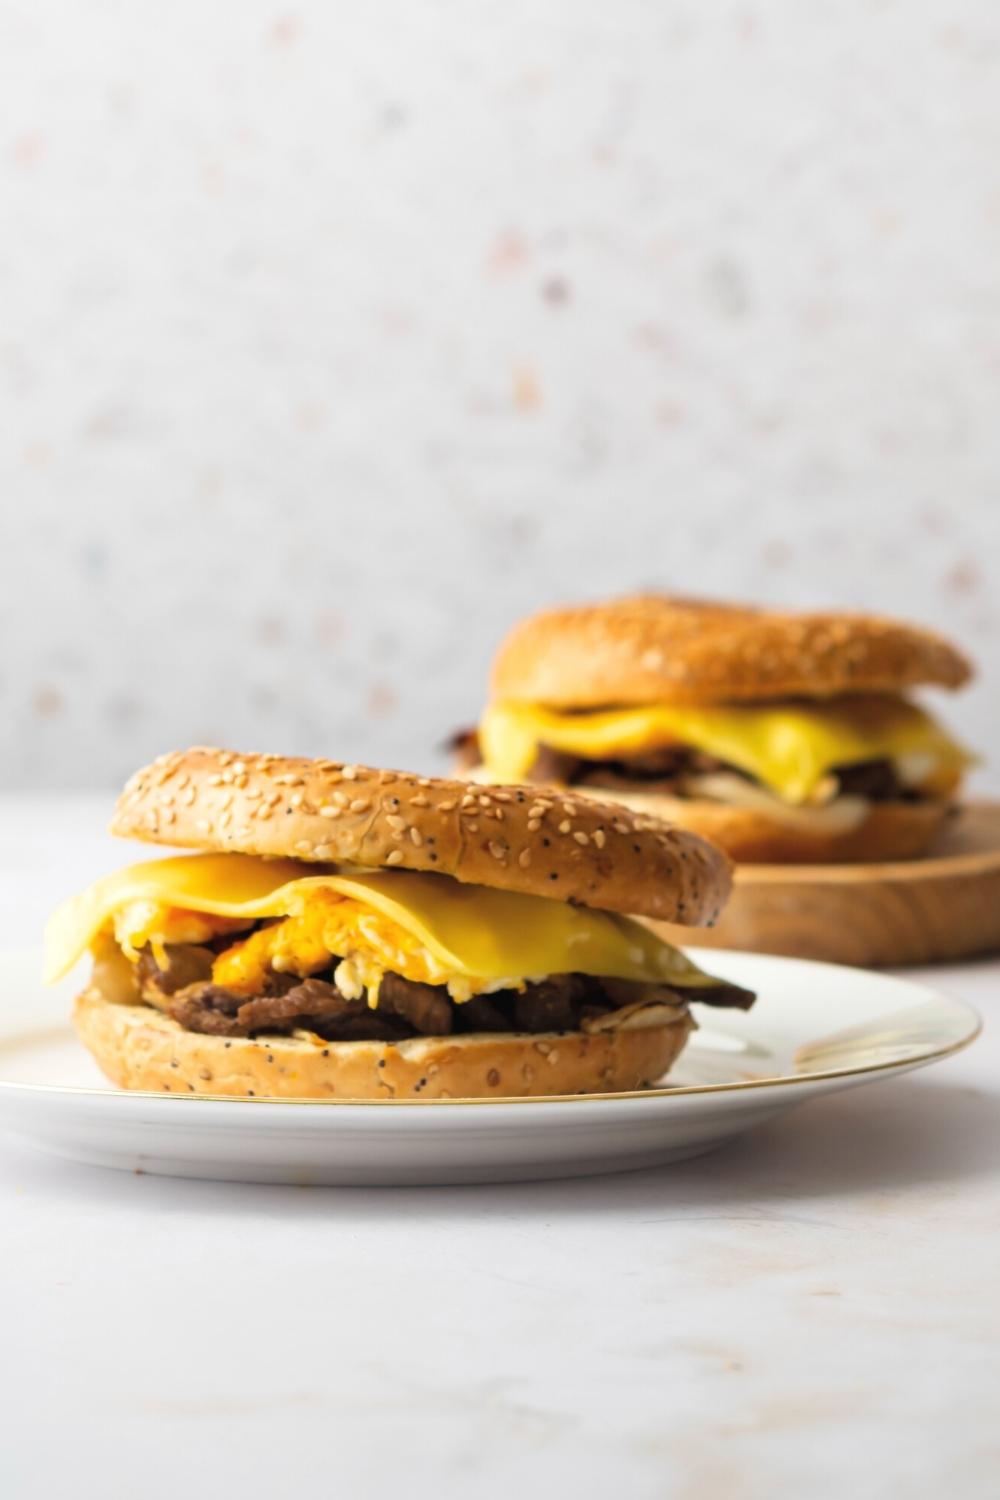 A steak, egg, and cheese bagel sandwich on a white plate. Behind it is the same sandwich on a wood board.